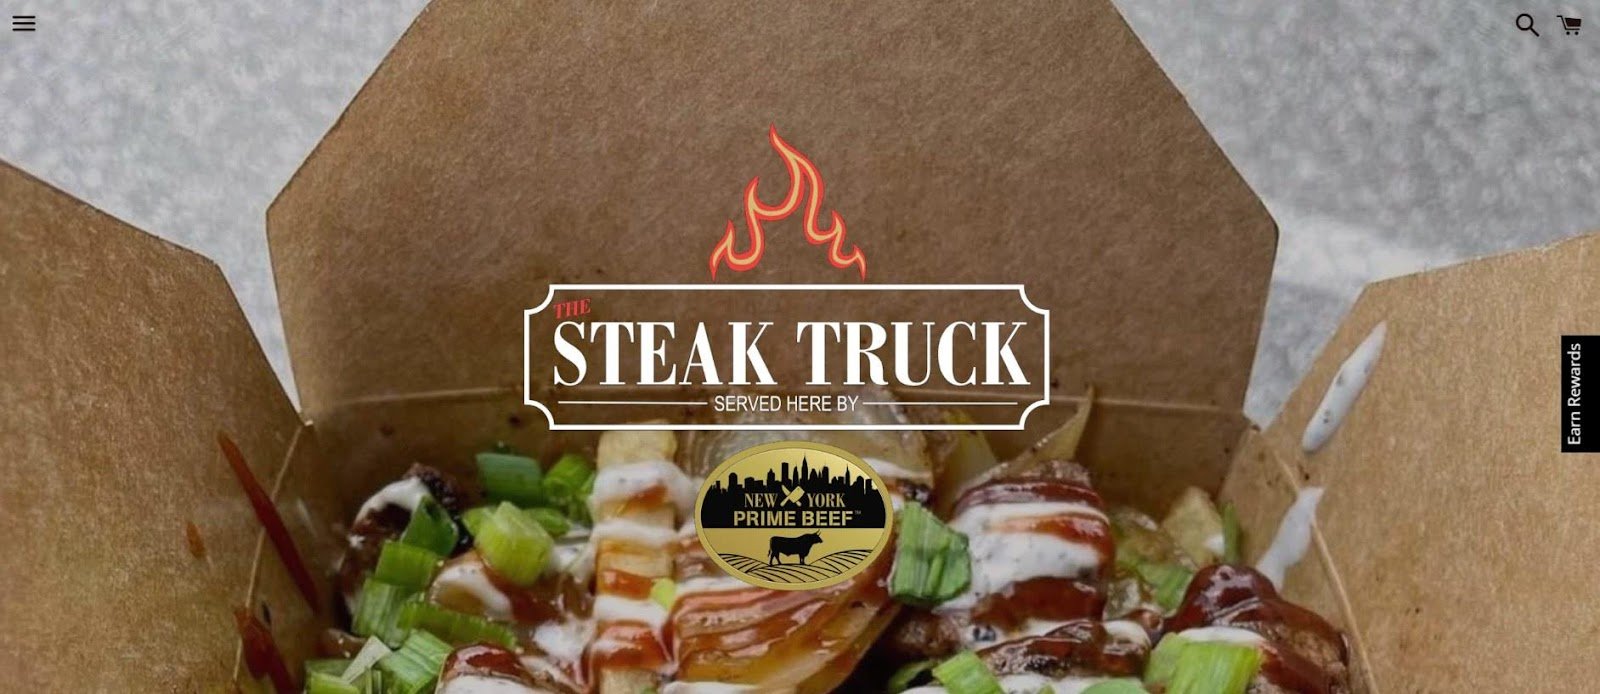 Food truck website design example from the Steak Truck.